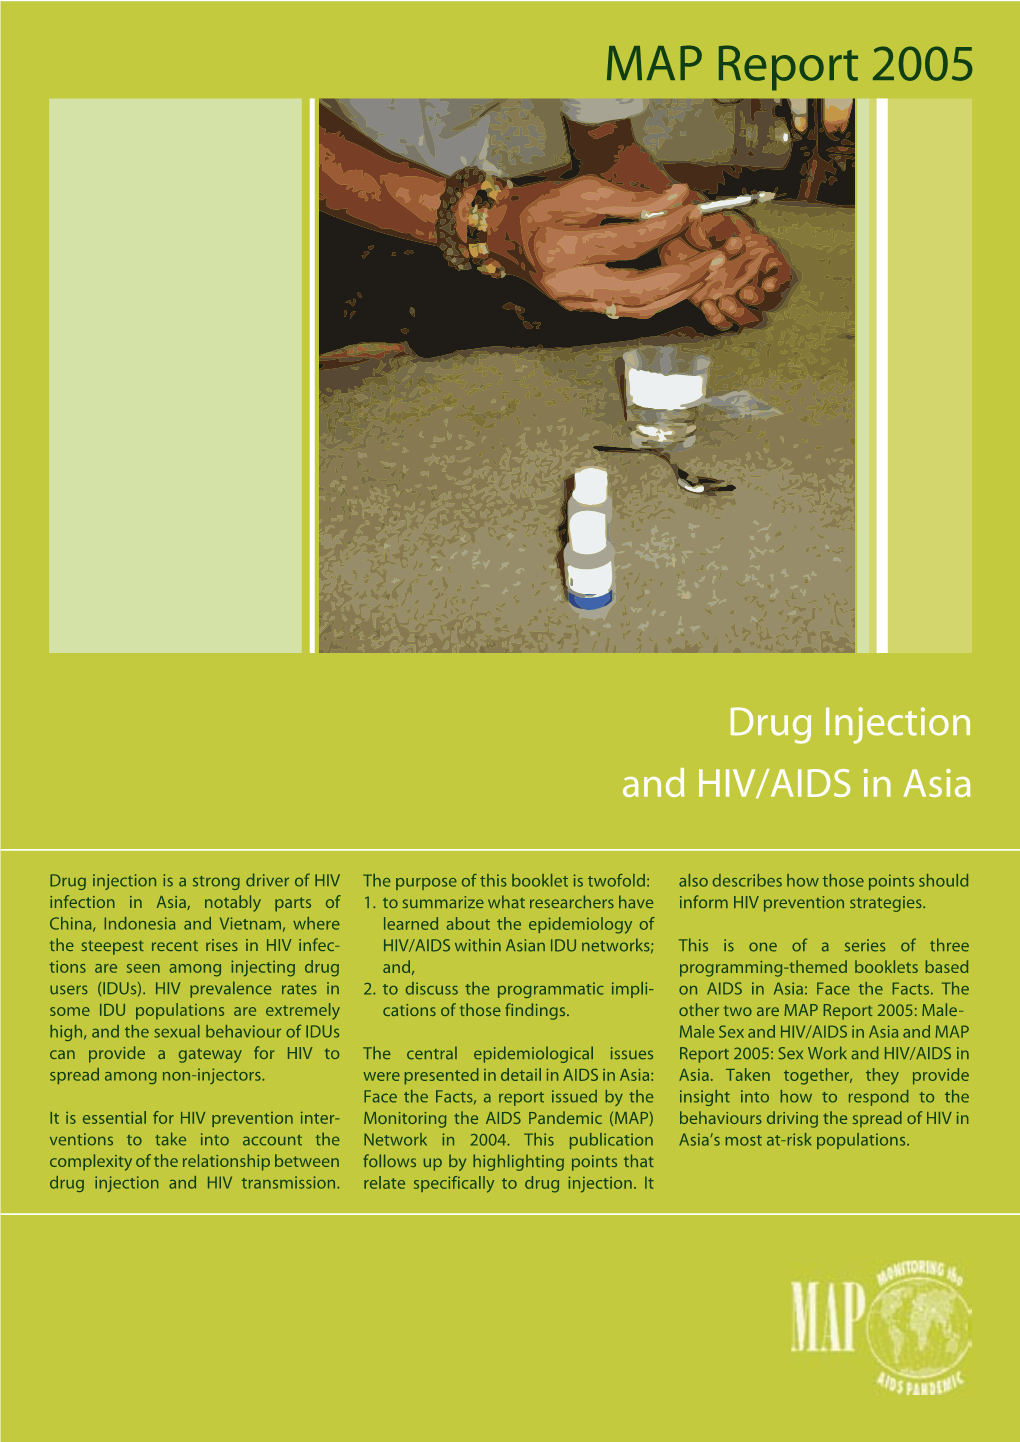 Drug Injection and HIV/AIDS in Asia